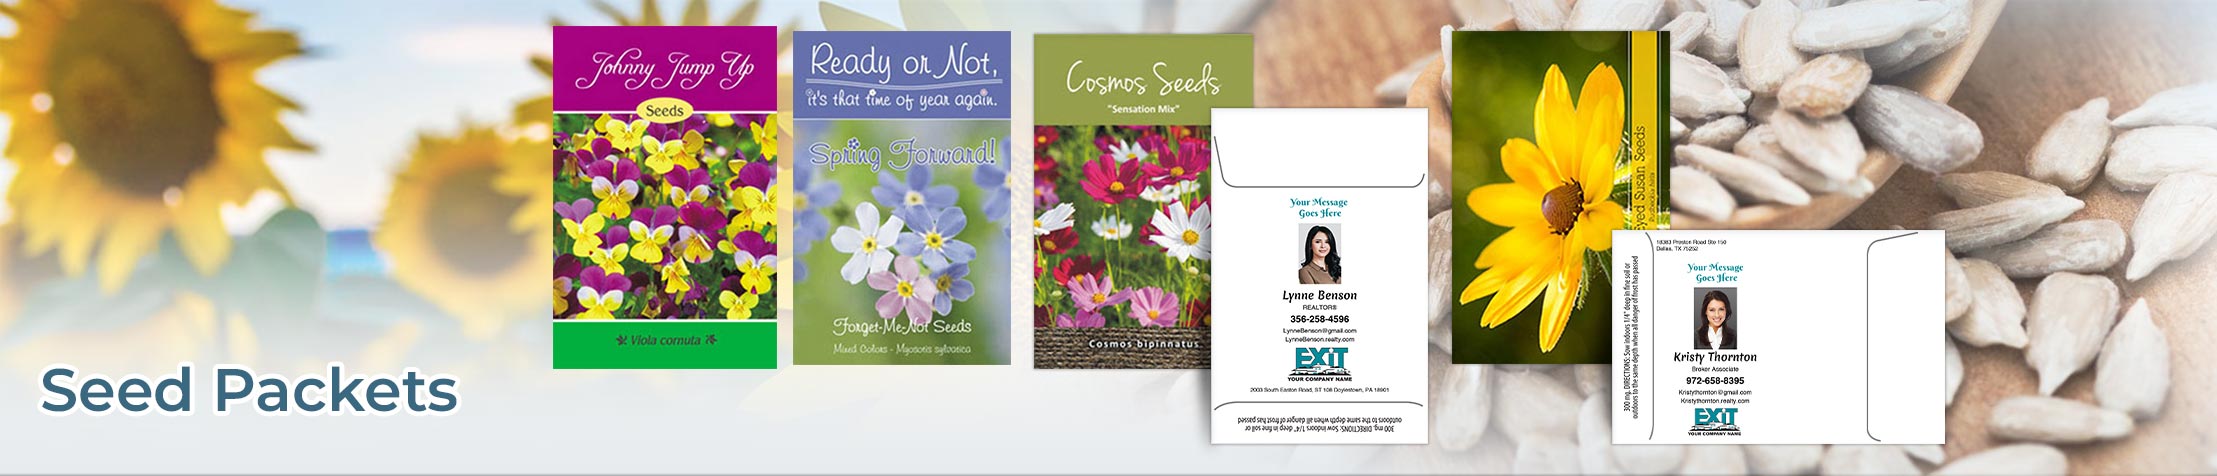 Exit Realty Real Estate Seed Packets - Exit Realty approved vendor personalized realtor promotional products | BestPrintBuy.com